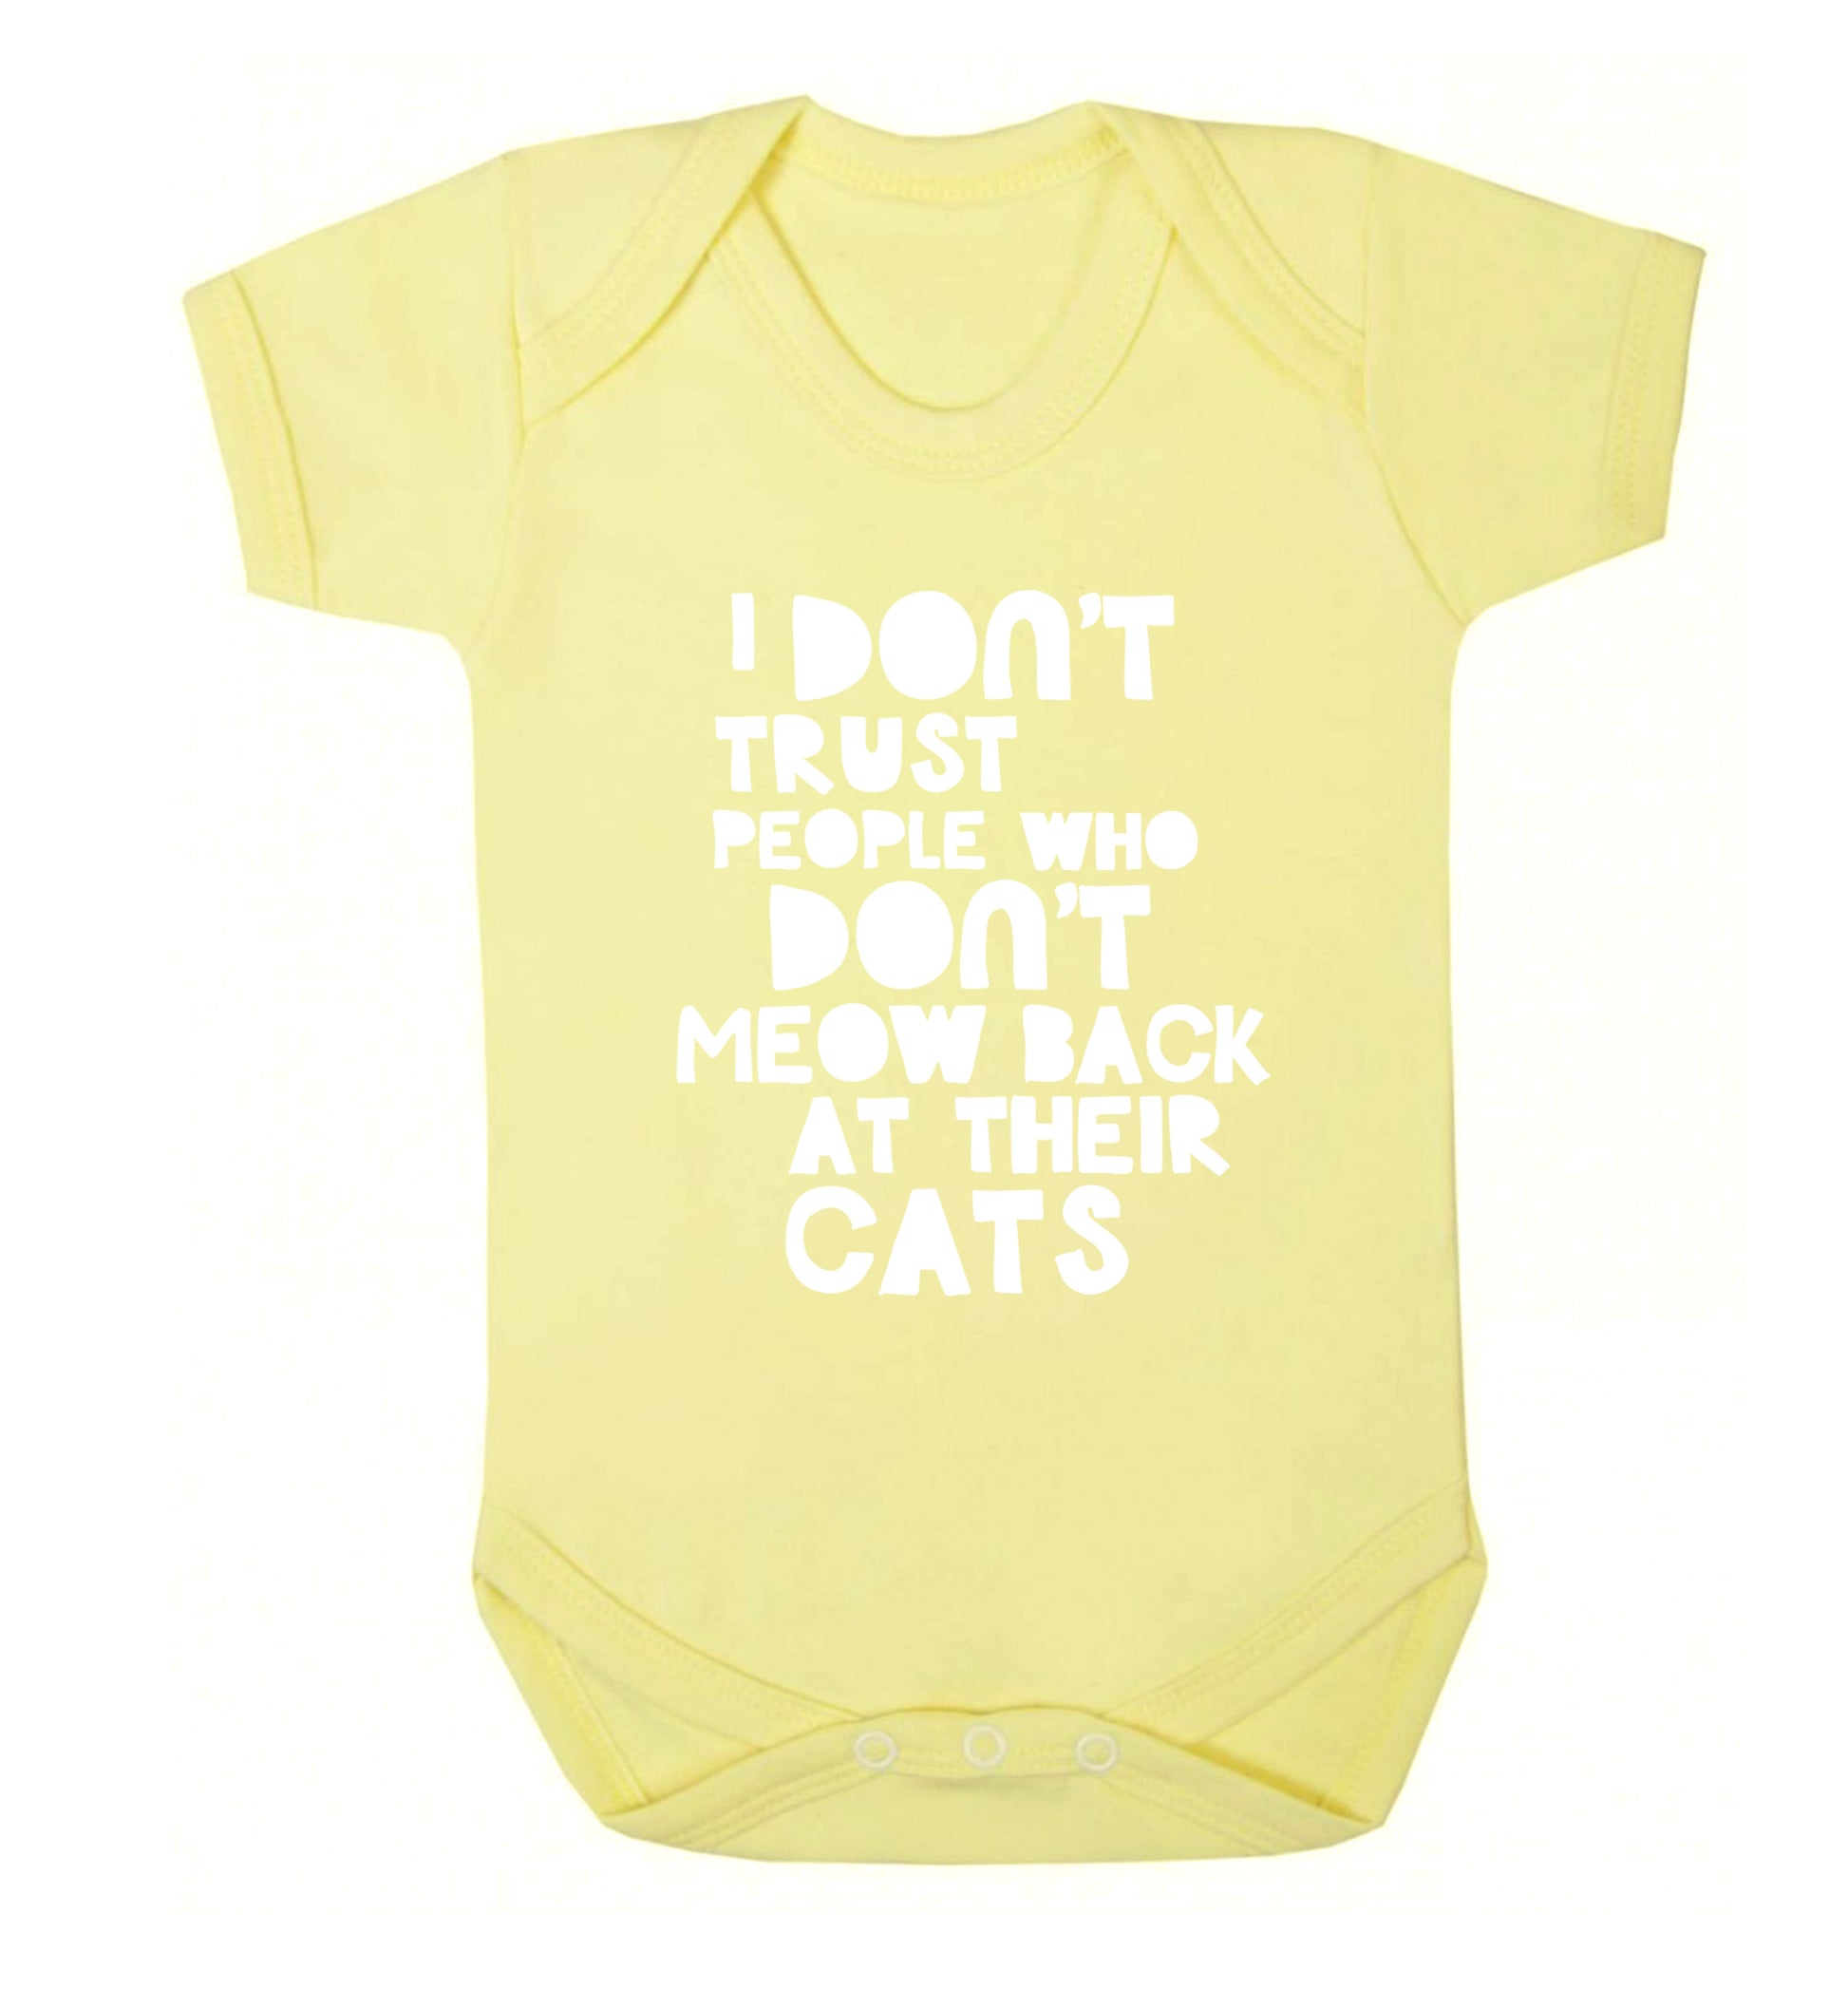 I don't trust people who don't meow back at their cats Baby Vest pale yellow 18-24 months